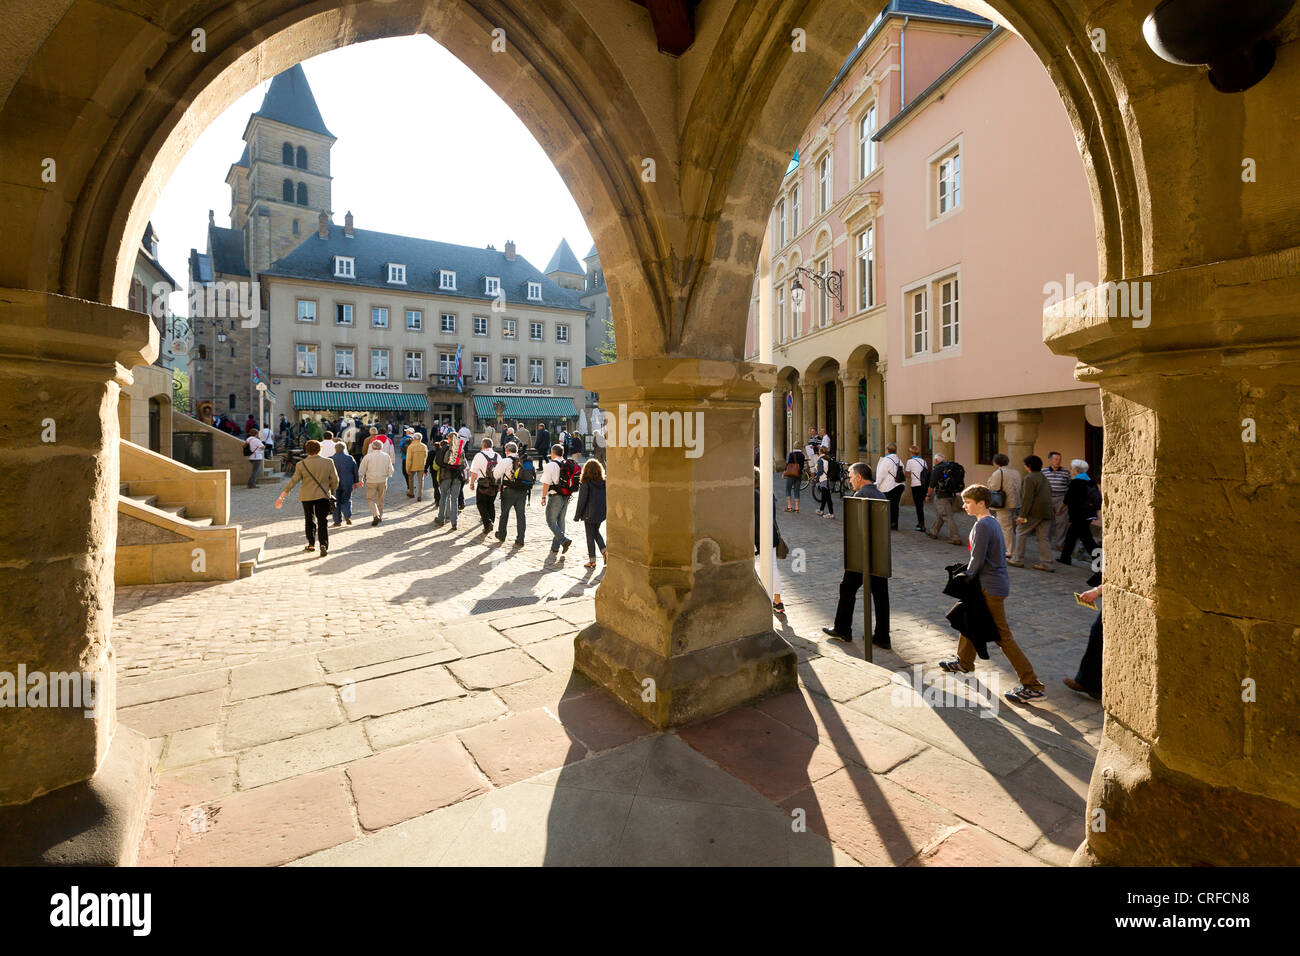 View on marquet square through the arcades of the medieval townhall Denzelt, dancers on the road for thejumping procession. Stock Photo